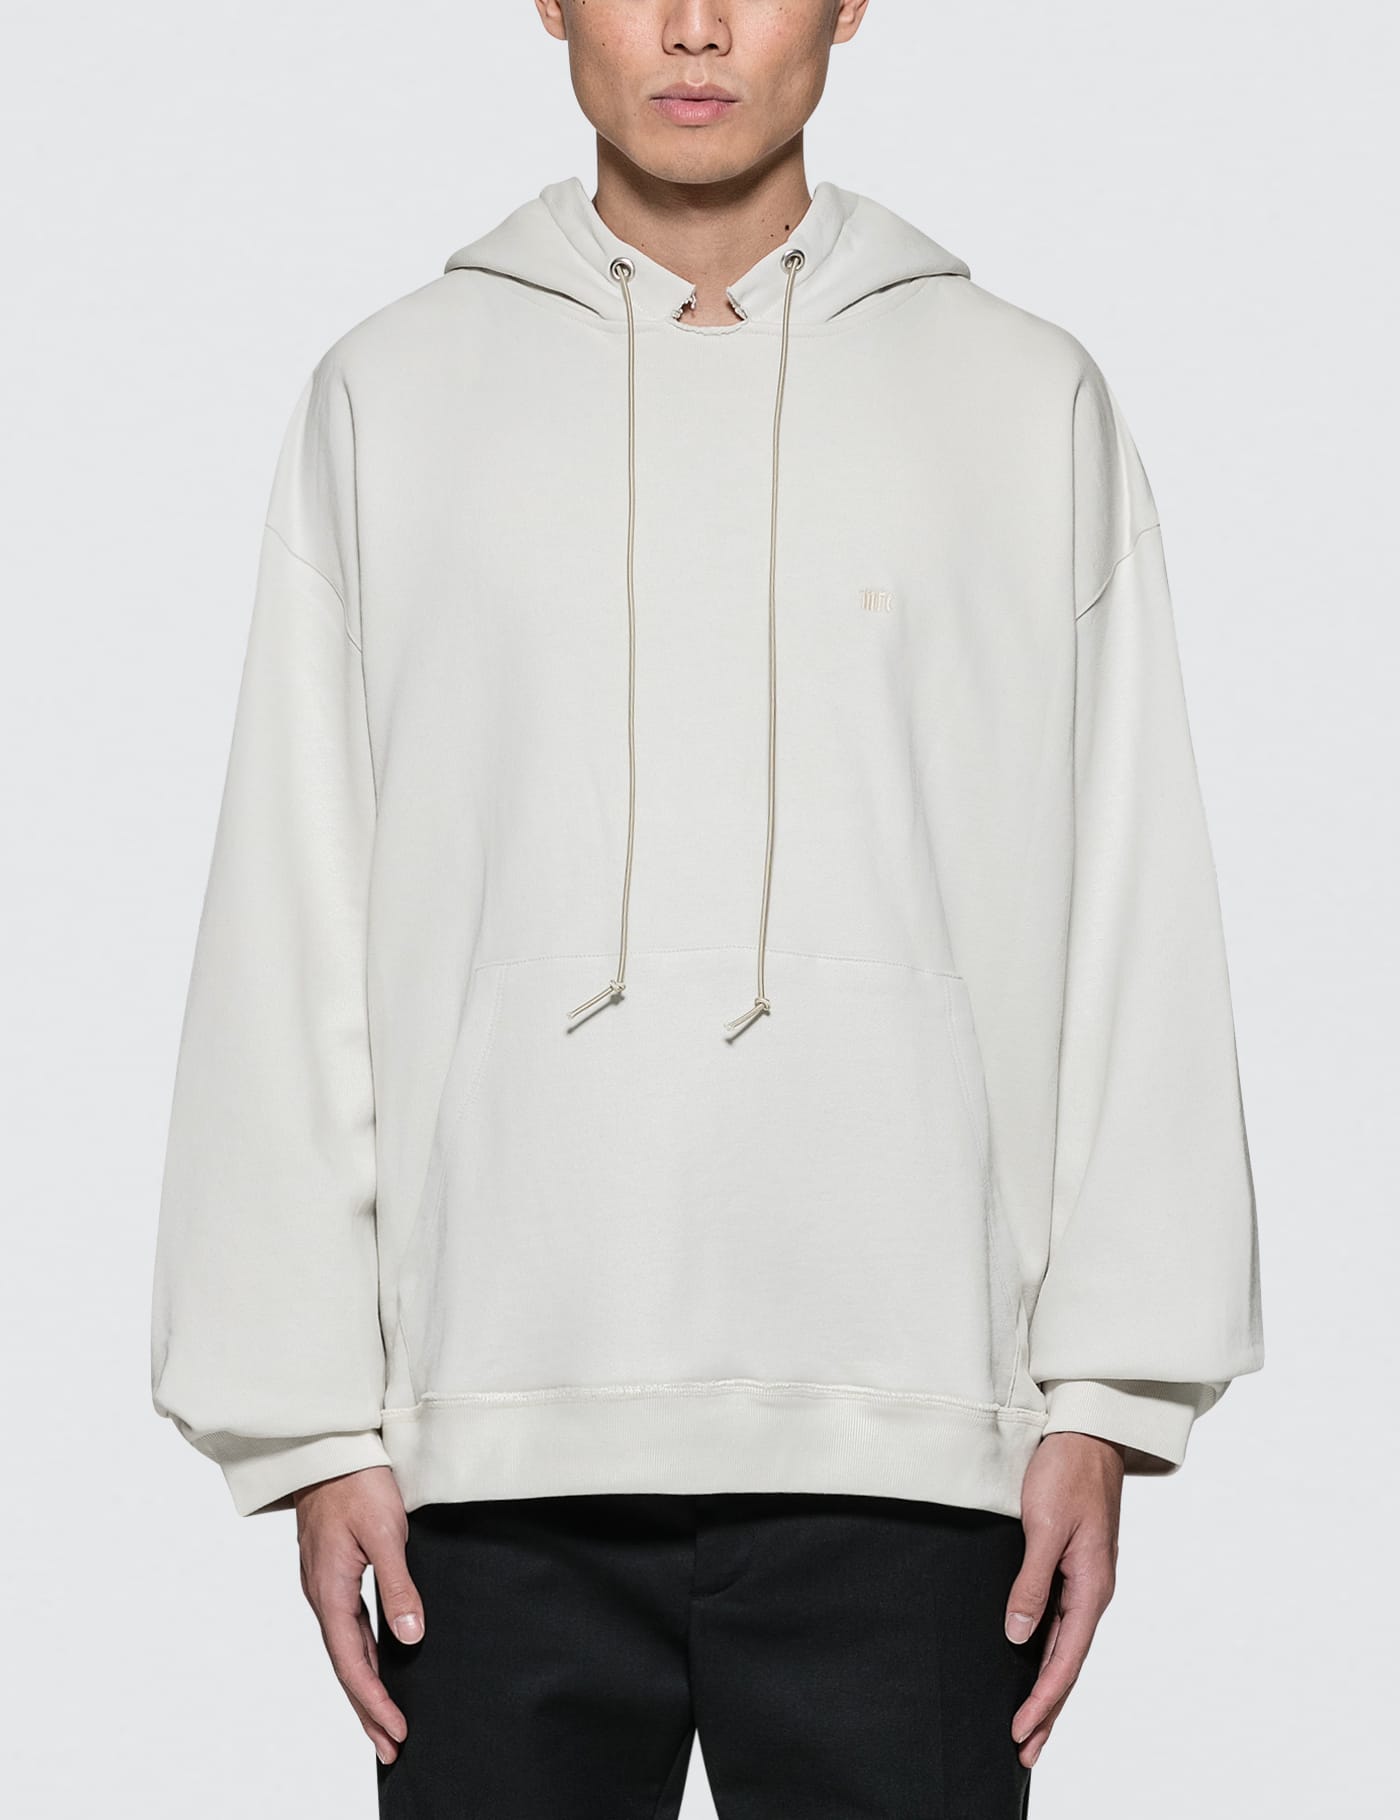 Mr. Completely - Factory Hoodie | HBX - Globally Curated Fashion